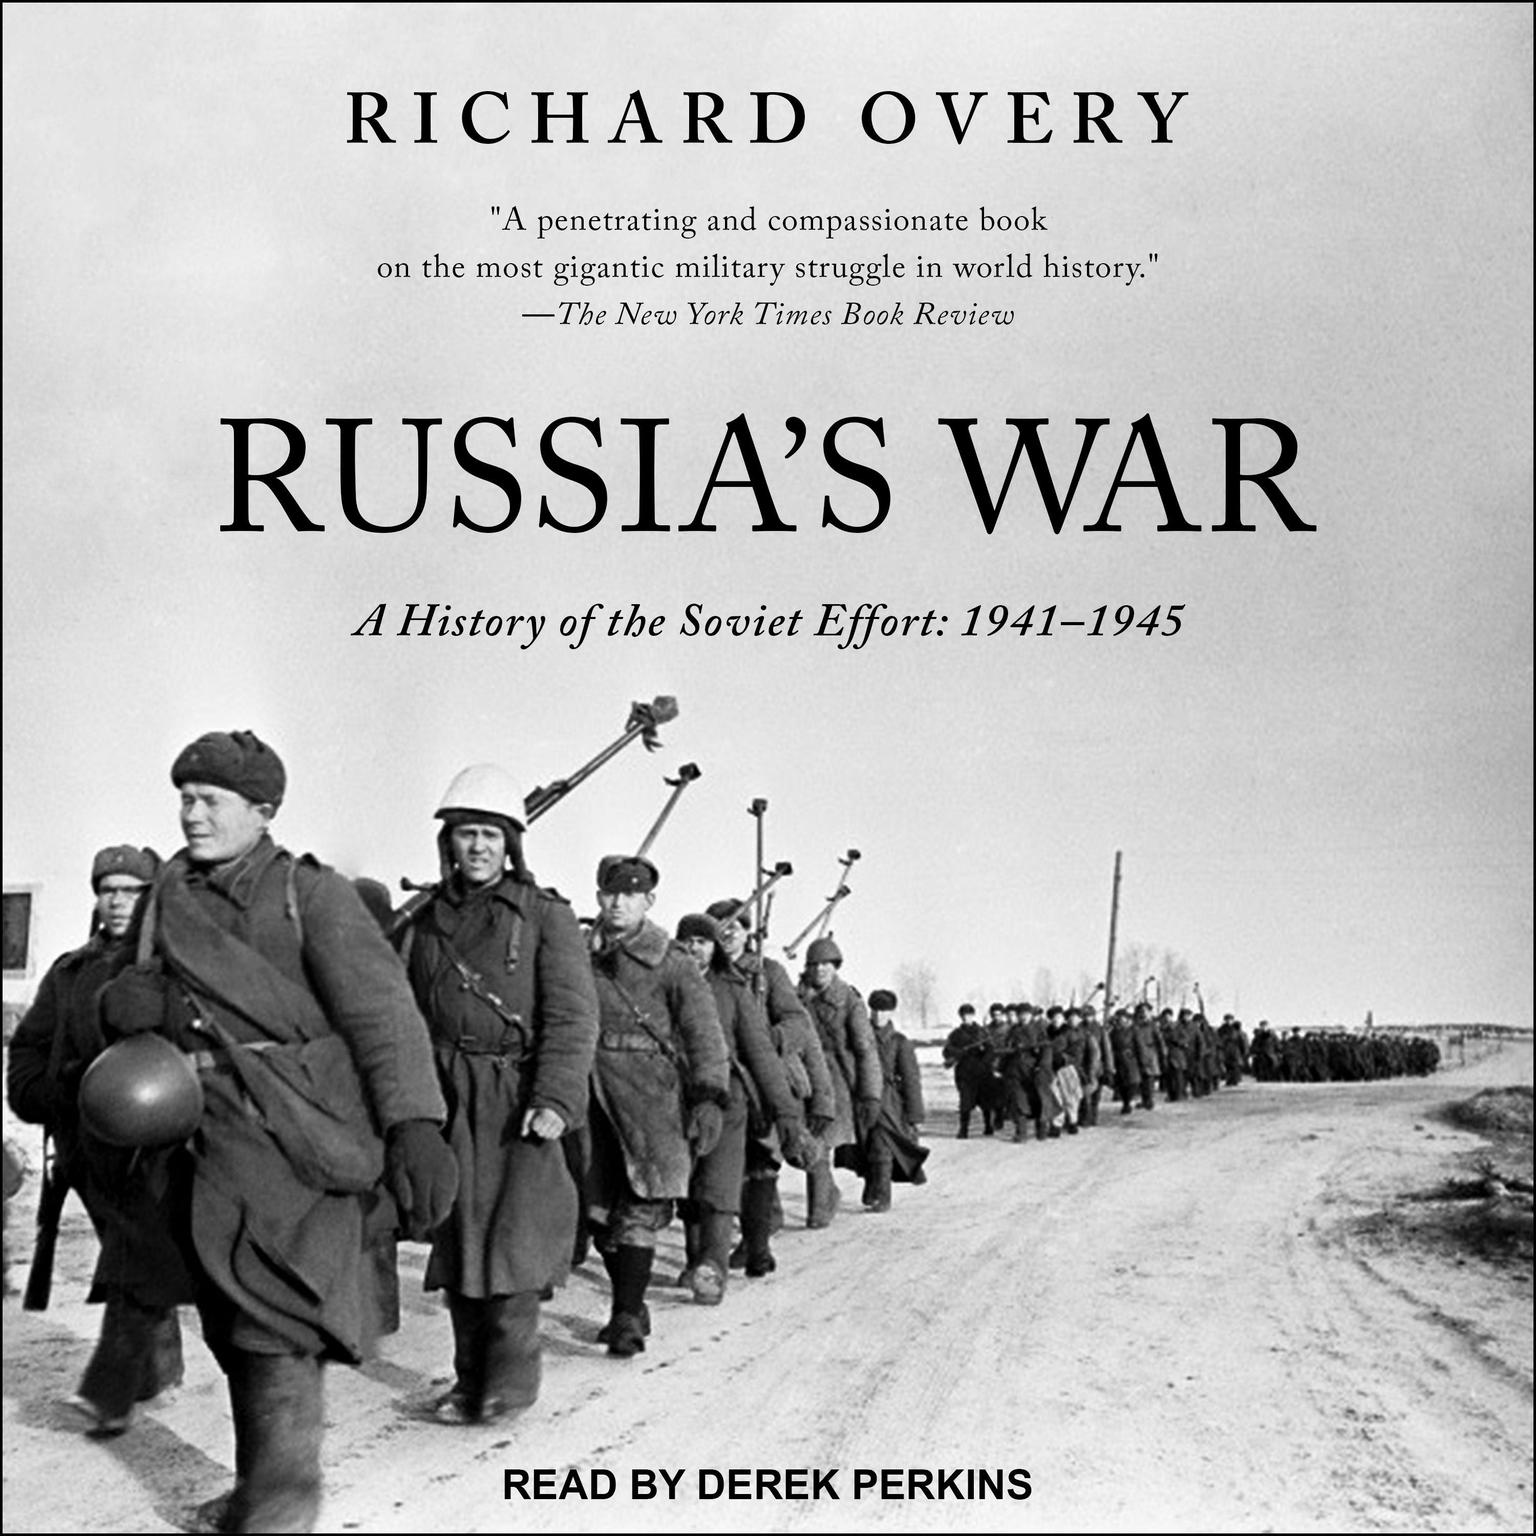 Russias War: A History of the Soviet Effort: 1941-1945 Audiobook, by Richard Overy